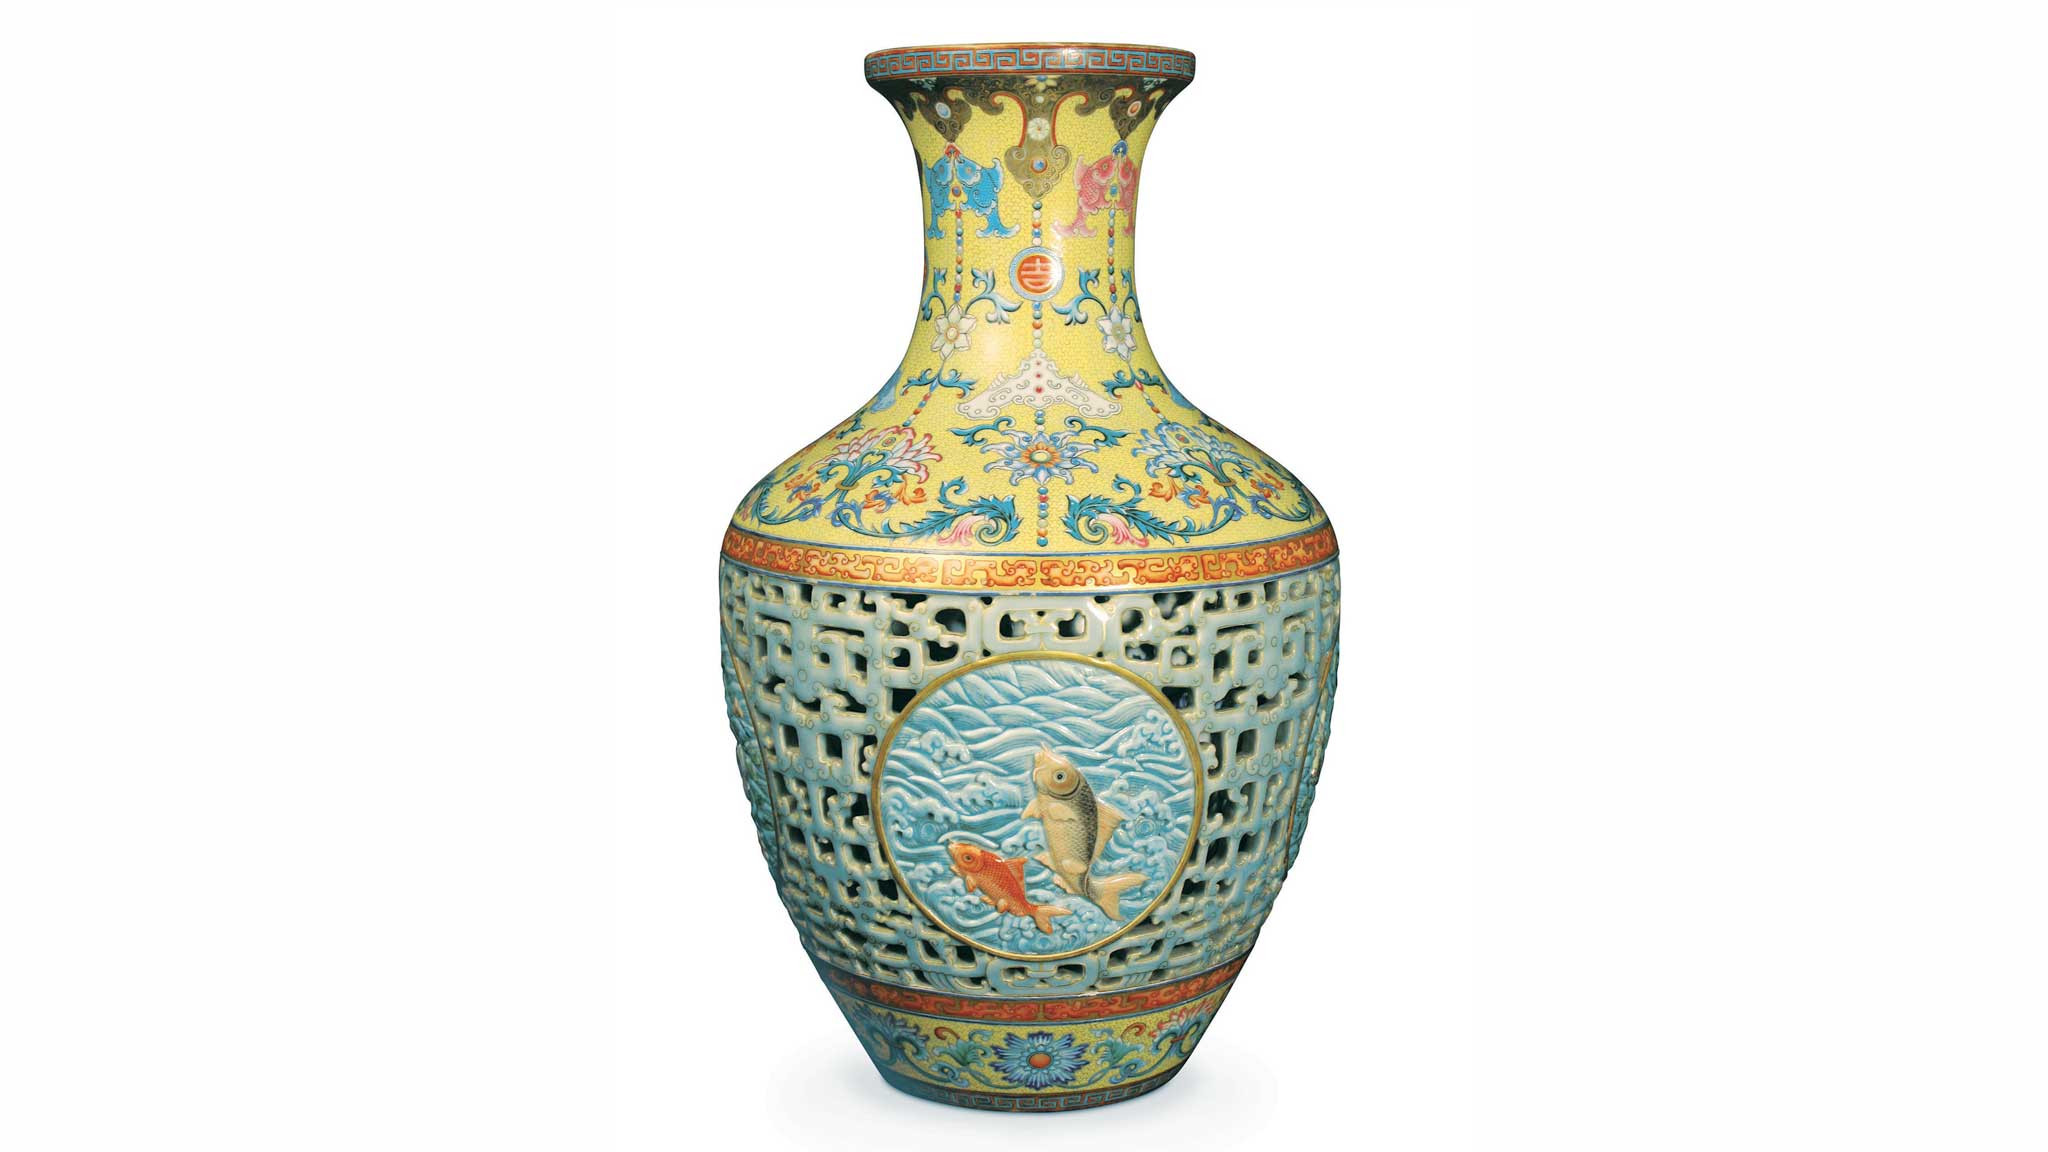 Pinner Qing Dynasty Vase | Photo from justrichest.com | http://prod-upp-image-read.ft.com/091da228-5f44-11e2-8250-00144feab49a